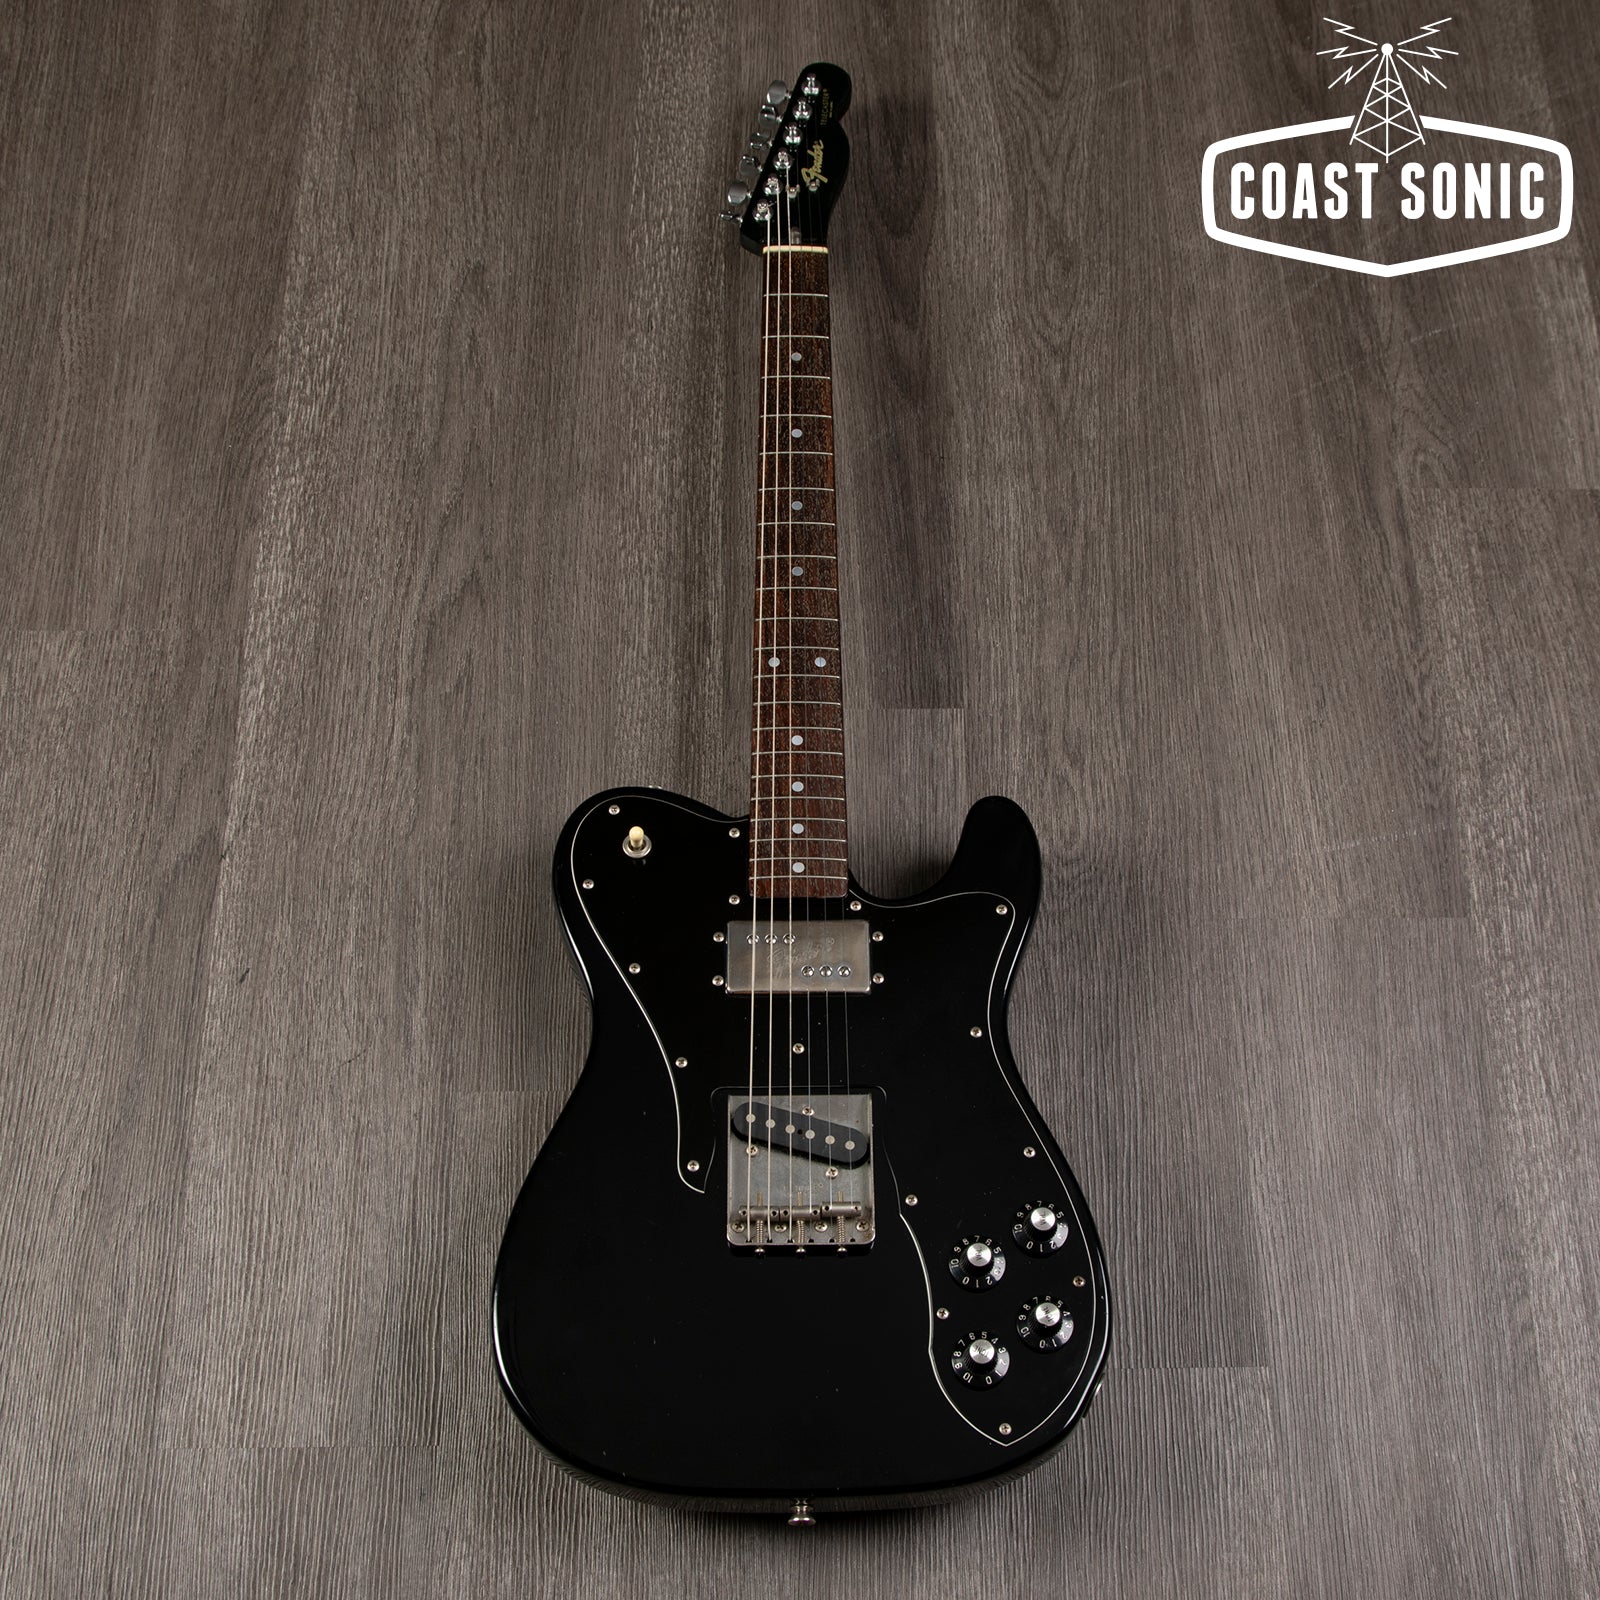 1986 Fender Telecaster Custom TC72 All-Black Made in Japan w/ Rare painted Neck and Headstock